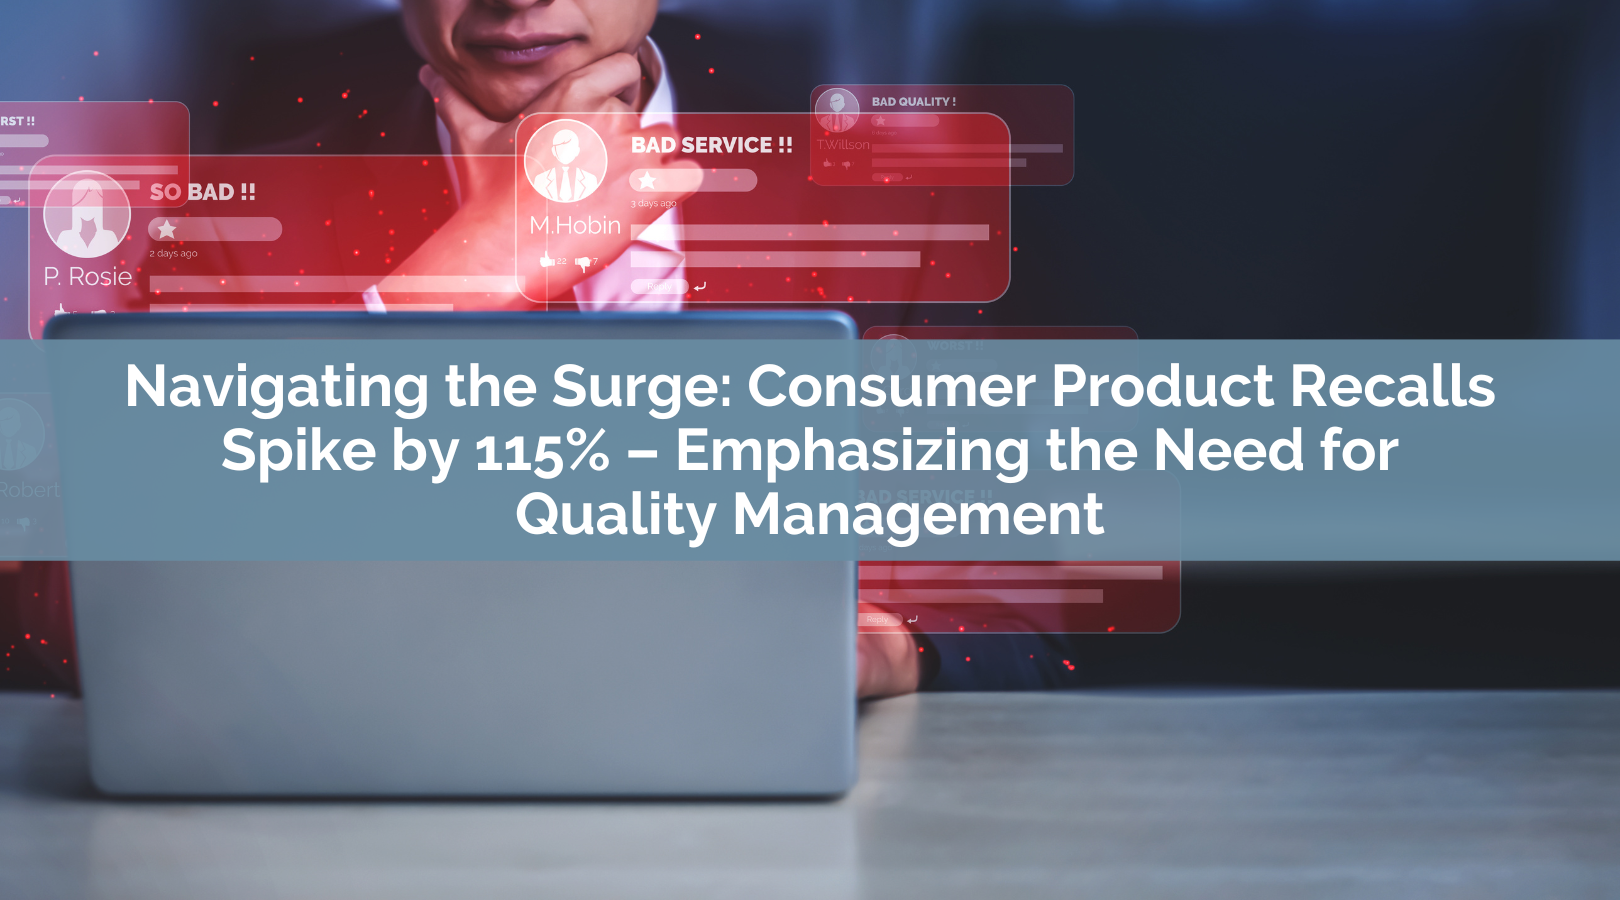 Navigating the Surge: Consumer Product Recalls Spike by 33% – Emphasizing the Need for Quality Management